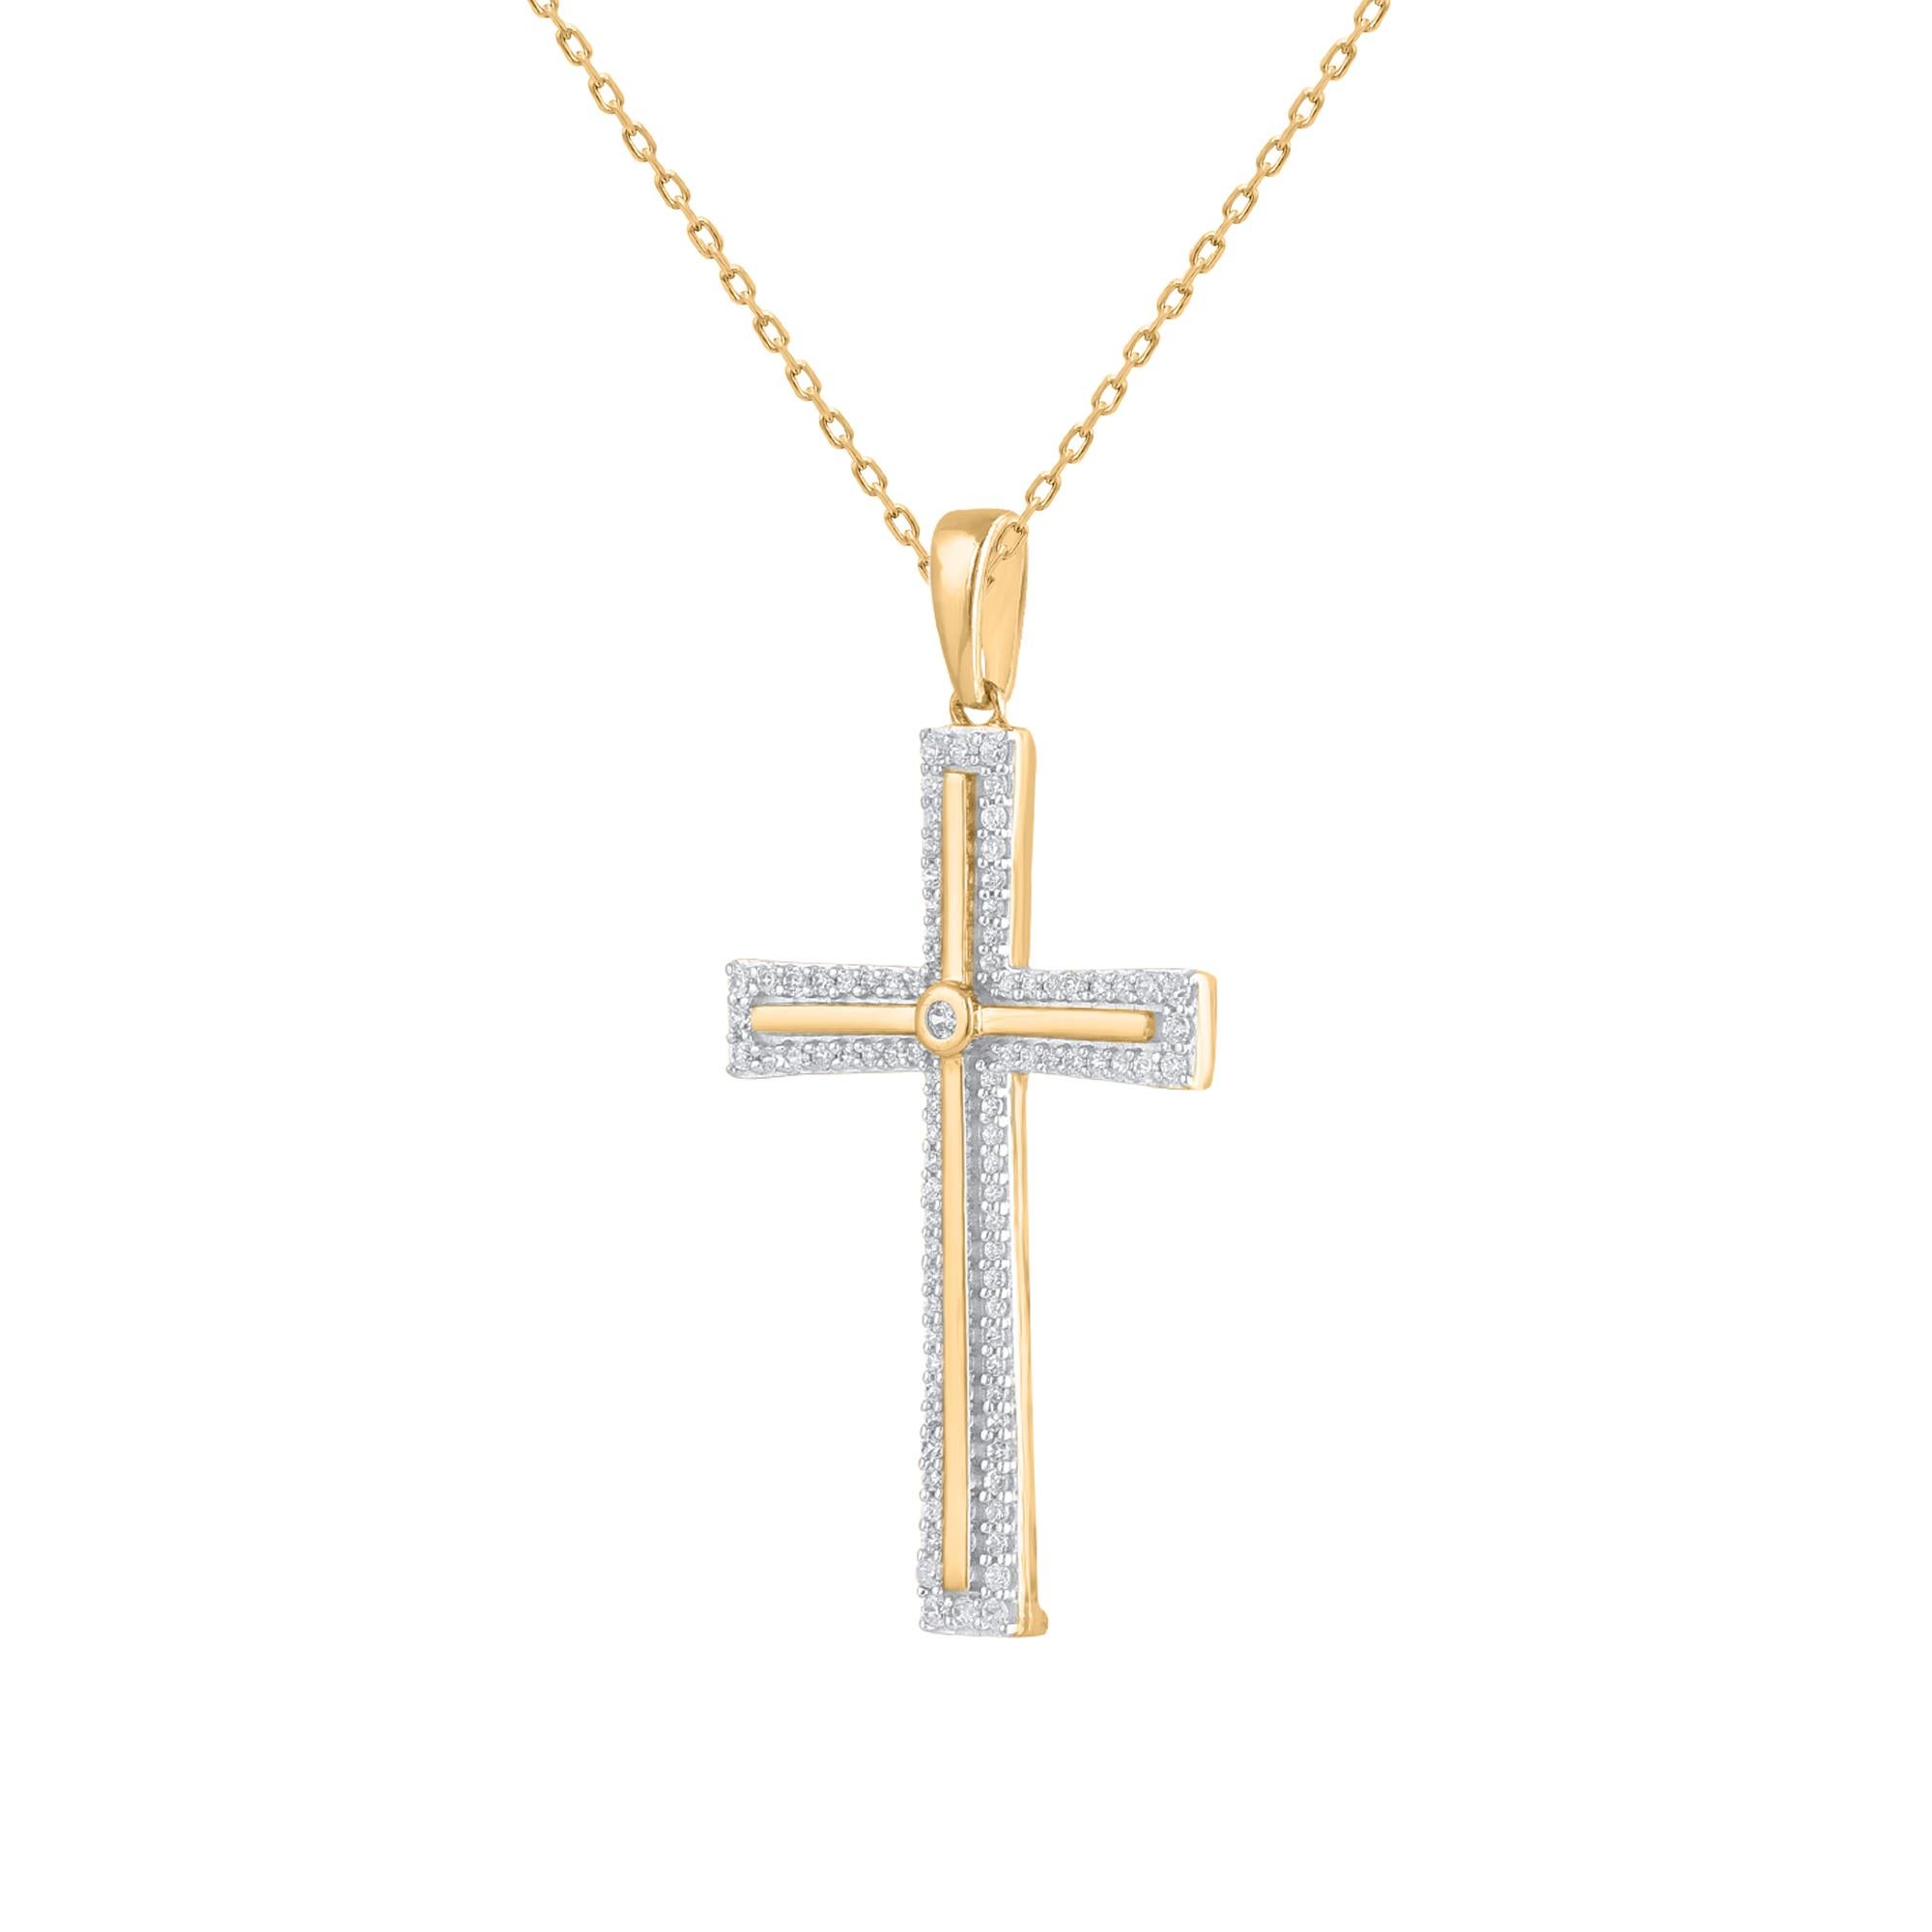 Let your faith shine with this simple and elegant cross pendant. Beautifully crafted by our inhouse experts in 14 karat yellow gold and embellished with 91 single cut and brilliant cut diamond set in prong & bezel setting. The total diamond weight